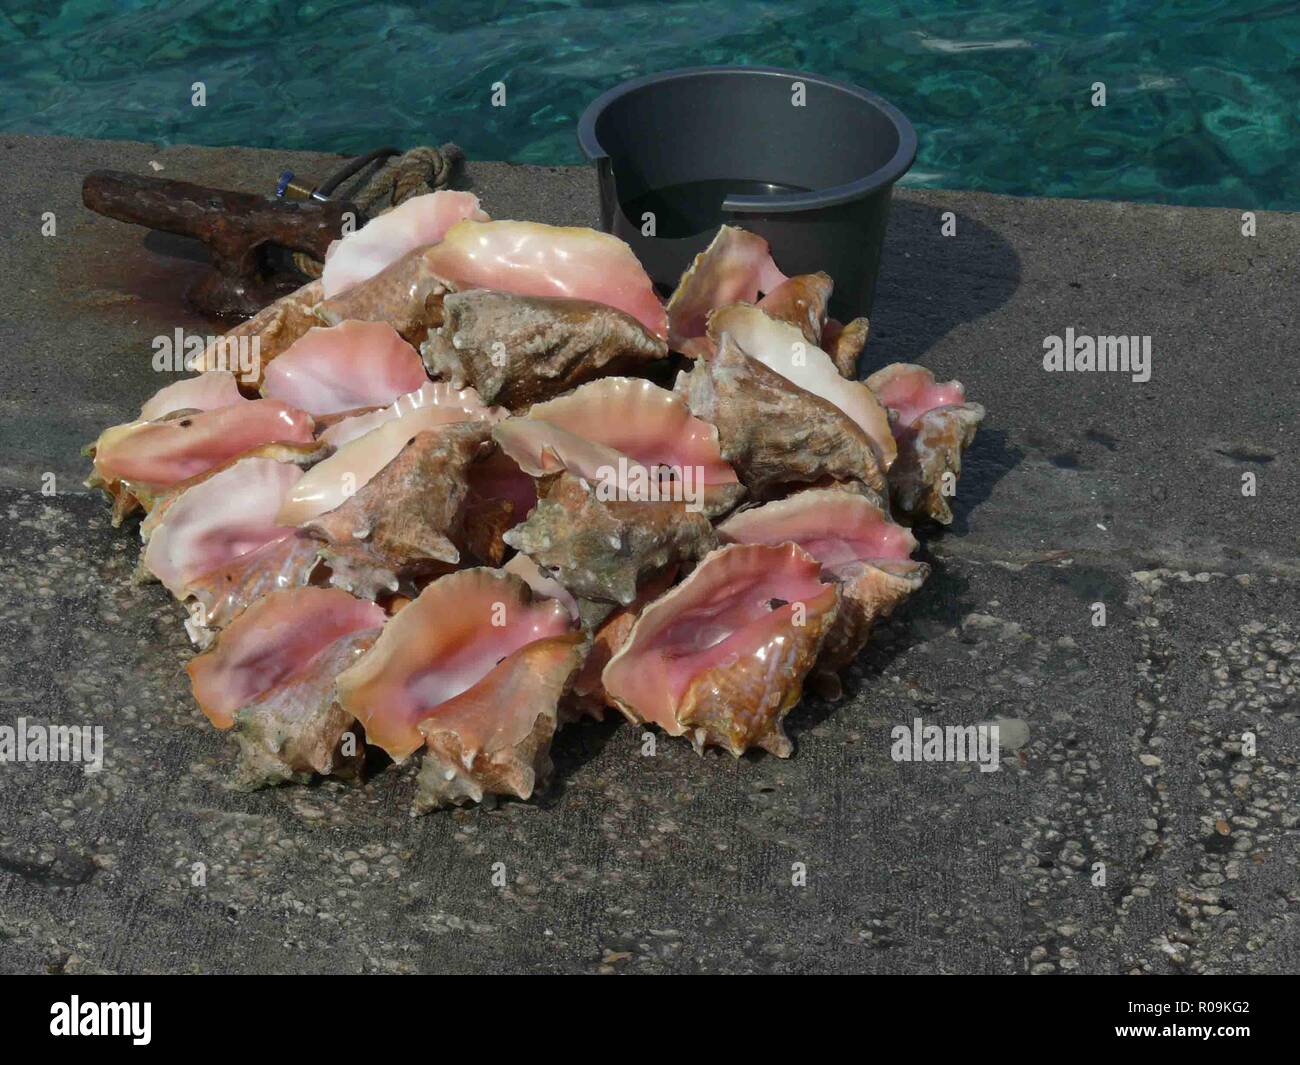 Nassau, New Providence, Bahamas. 16th Jan, 2009. Colorful conch shells for sale on the dock at the port of Nassau, capital of the Bahamas and a popular cruise-ship destination. Credit: Arnold Drapkin/ZUMA Wire/Alamy Live News Stock Photo